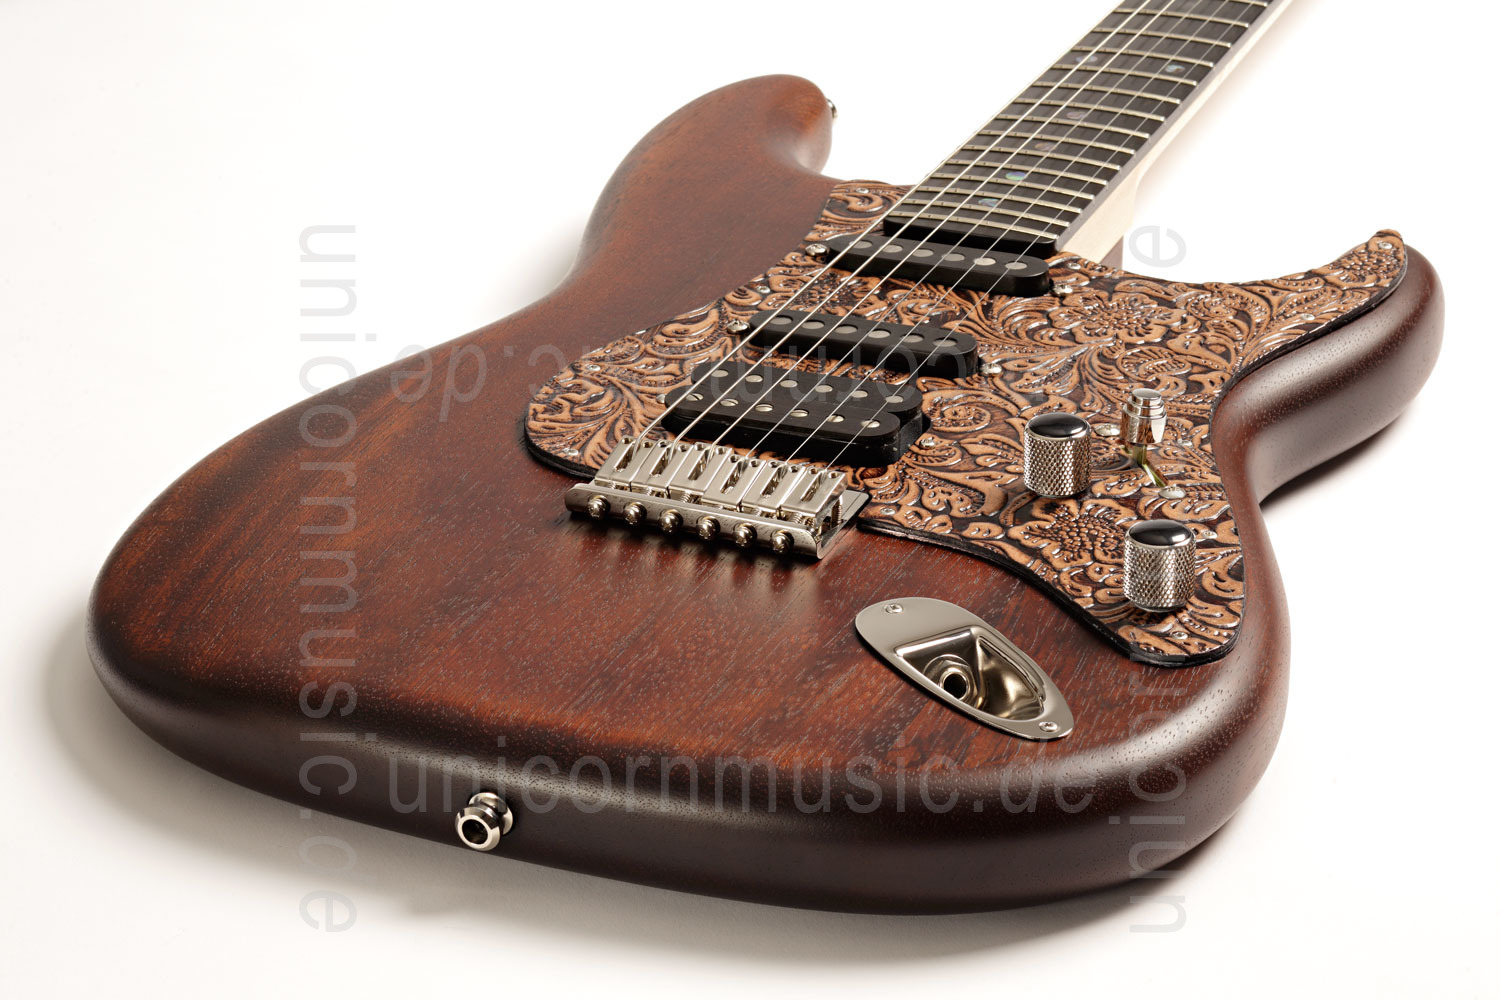 to article description / price Electric Guitar BERSTECHER Vintage 2018 - Old Whisky / Floral Nature + hard case - made in Germany